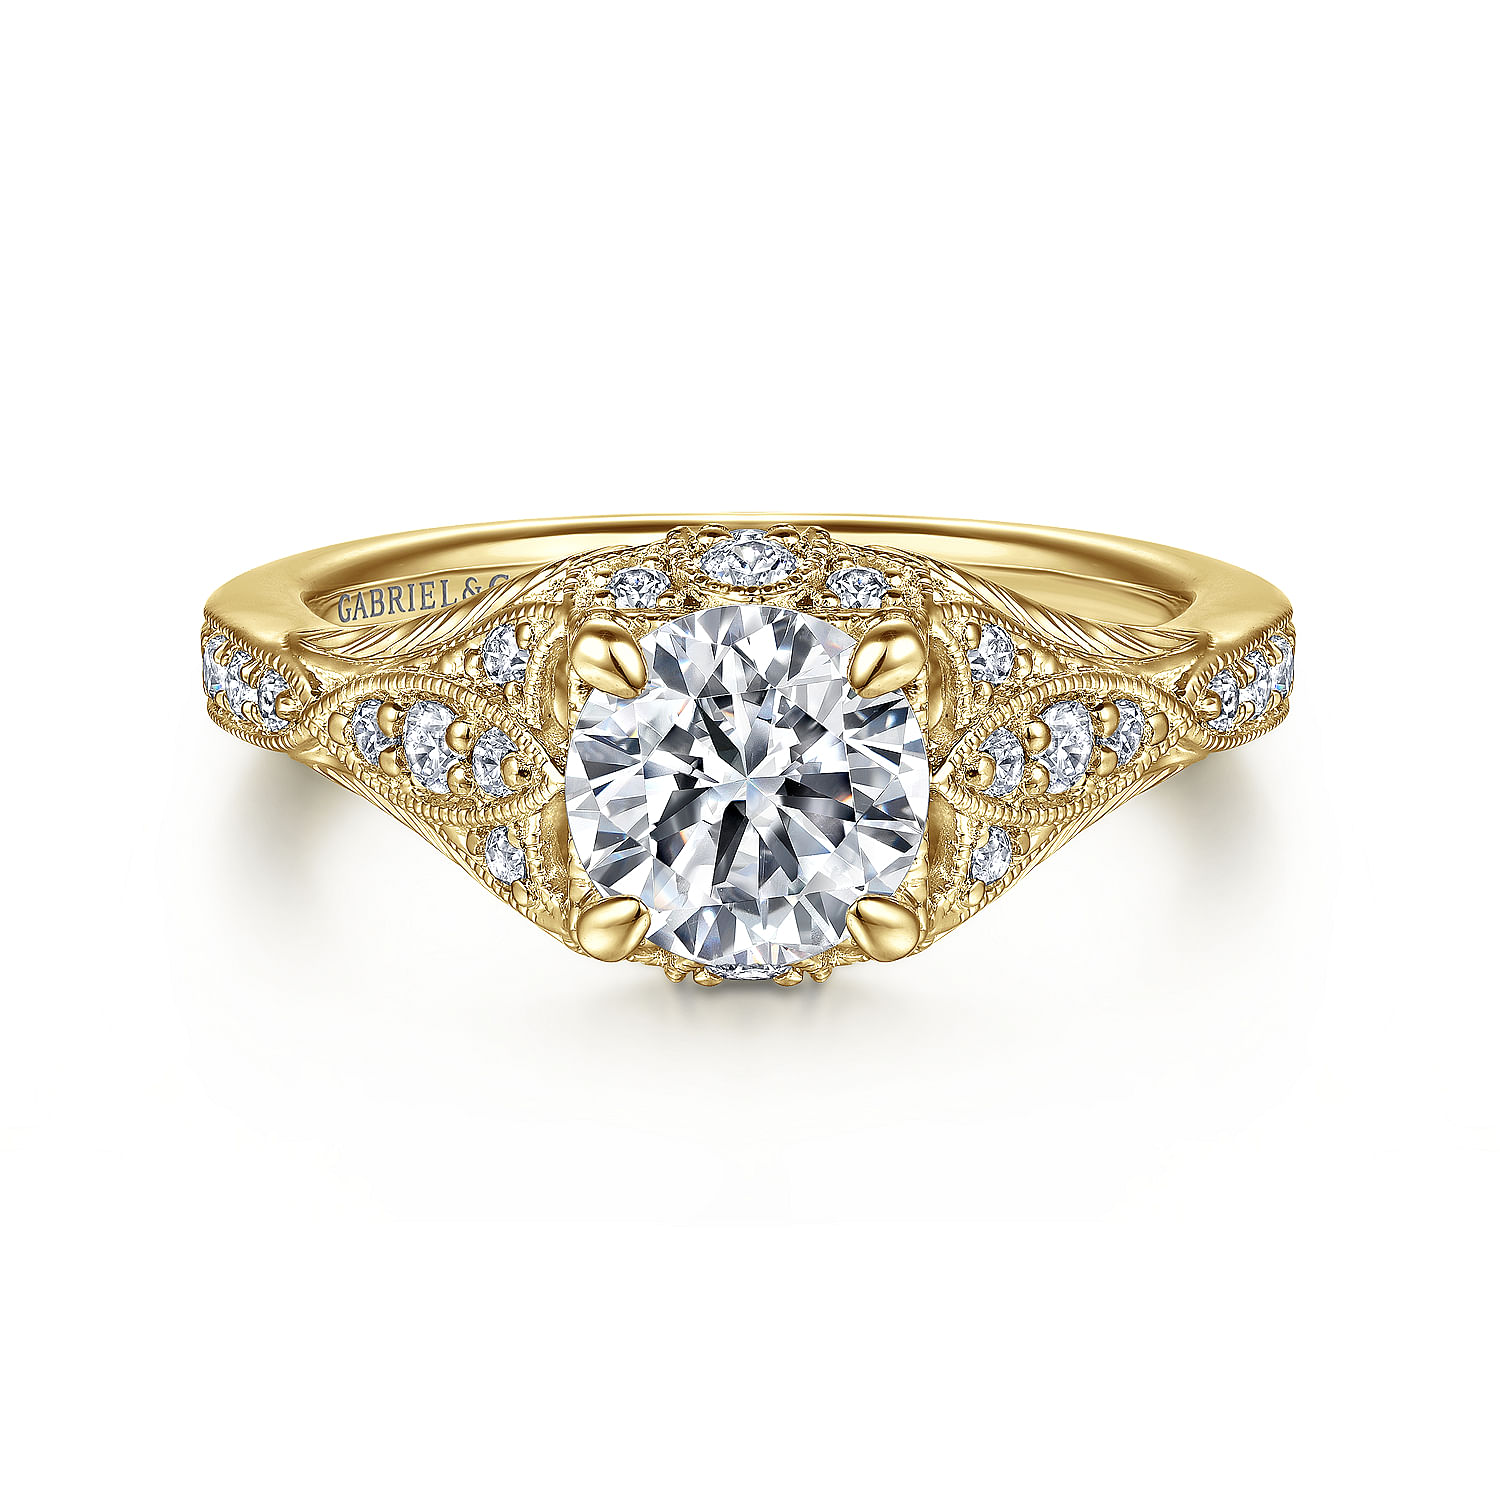 Windsor---Unique-14K-Yellow-Gold-Vintage-Inspired-Diamond-Halo-Engagement-Ring1